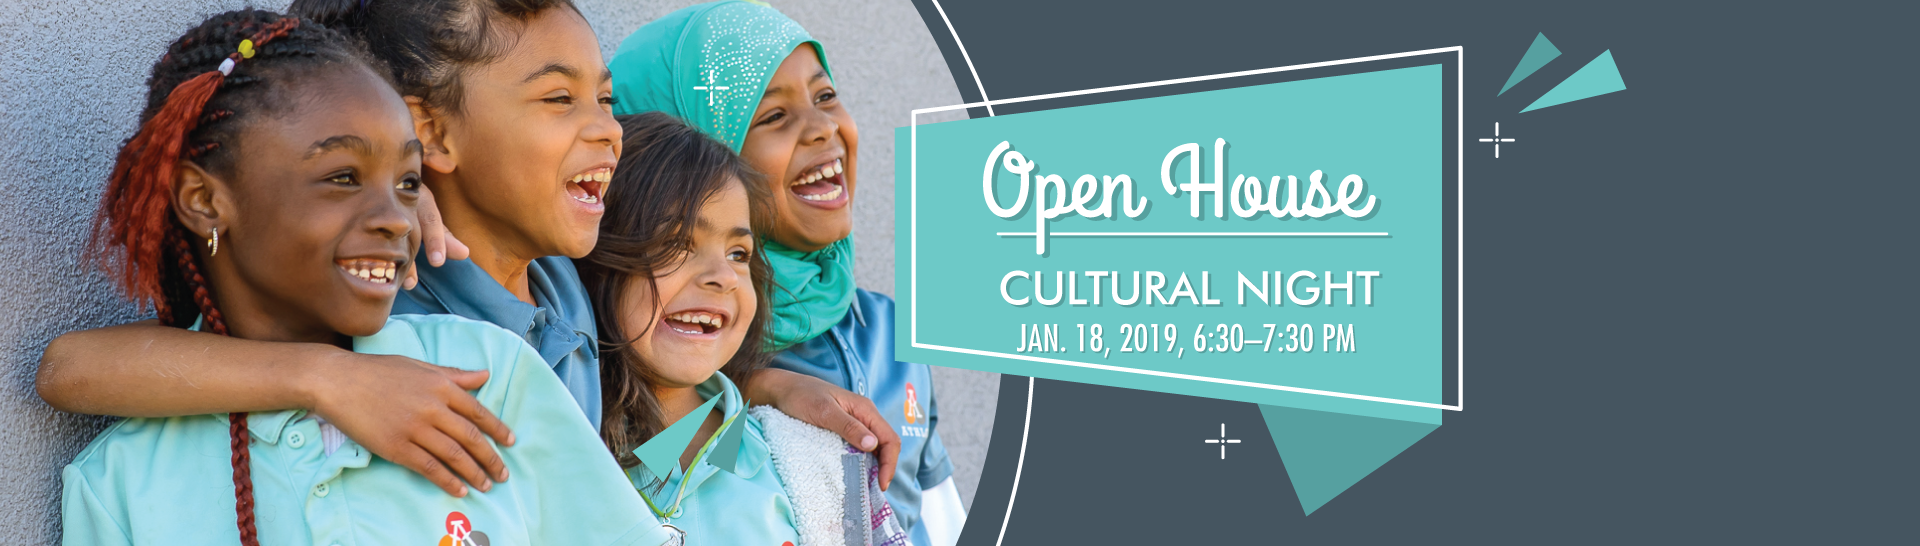 Open House - Cultural Night - January 18, 2019